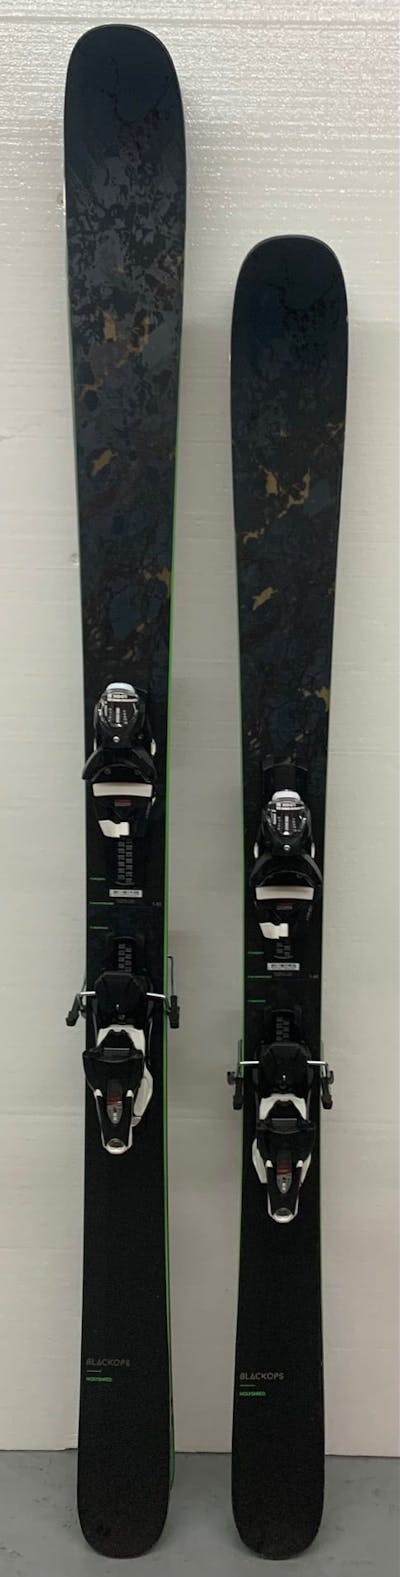 The Rossignol Black Ops Holy Shred Skis.